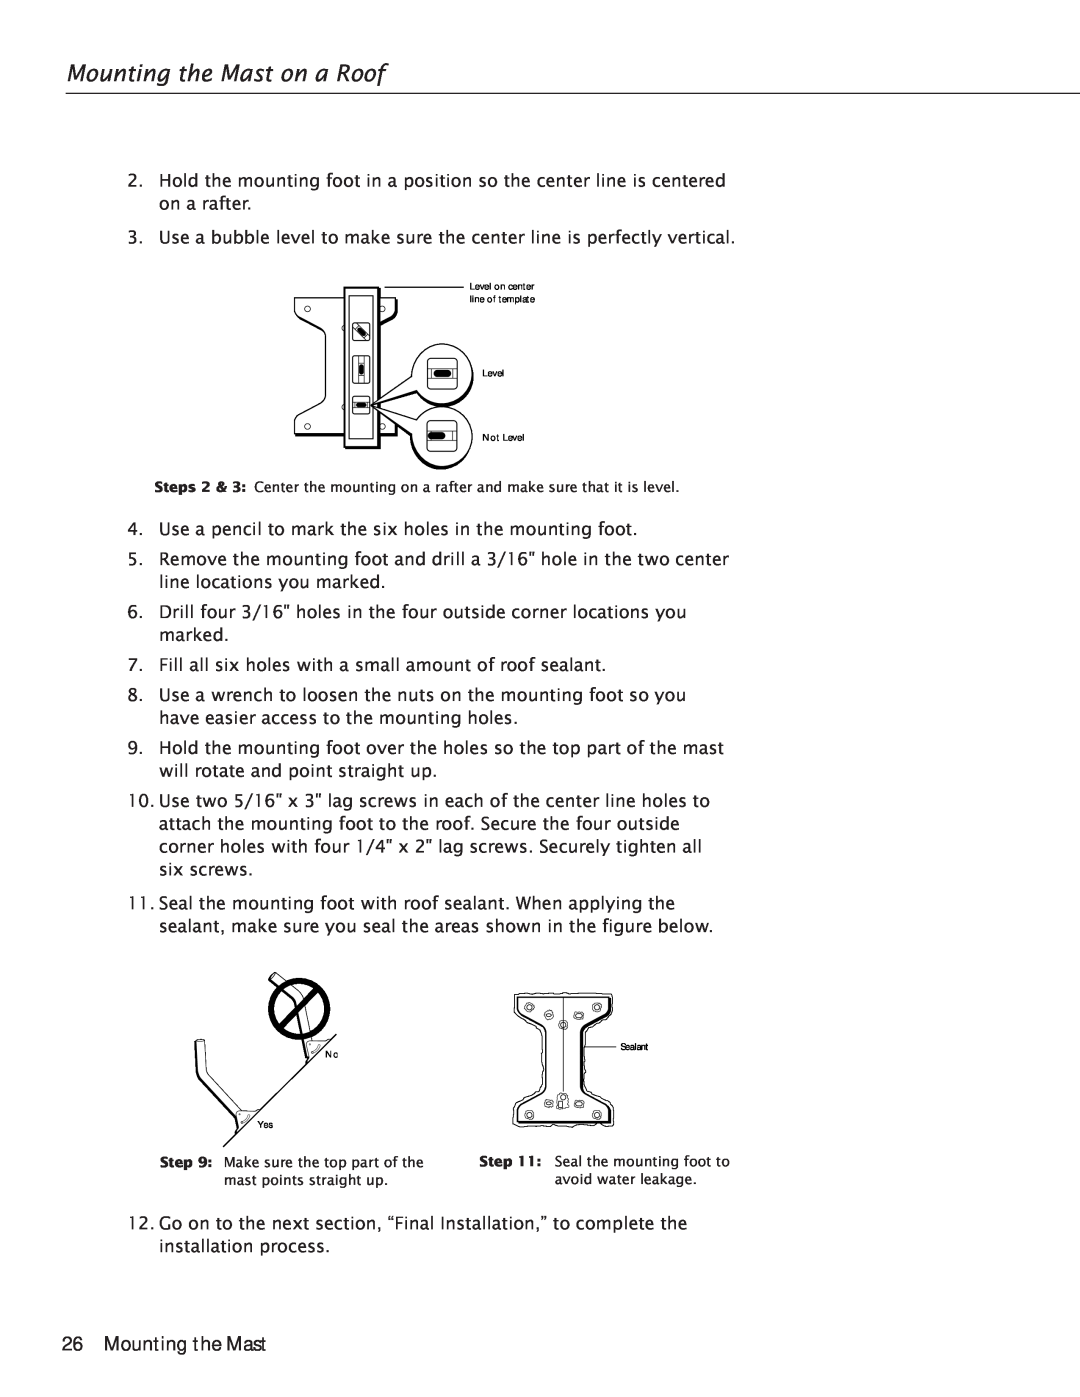 RCA Satellite TV Antenna manual Mounting the Mast on a Roof 